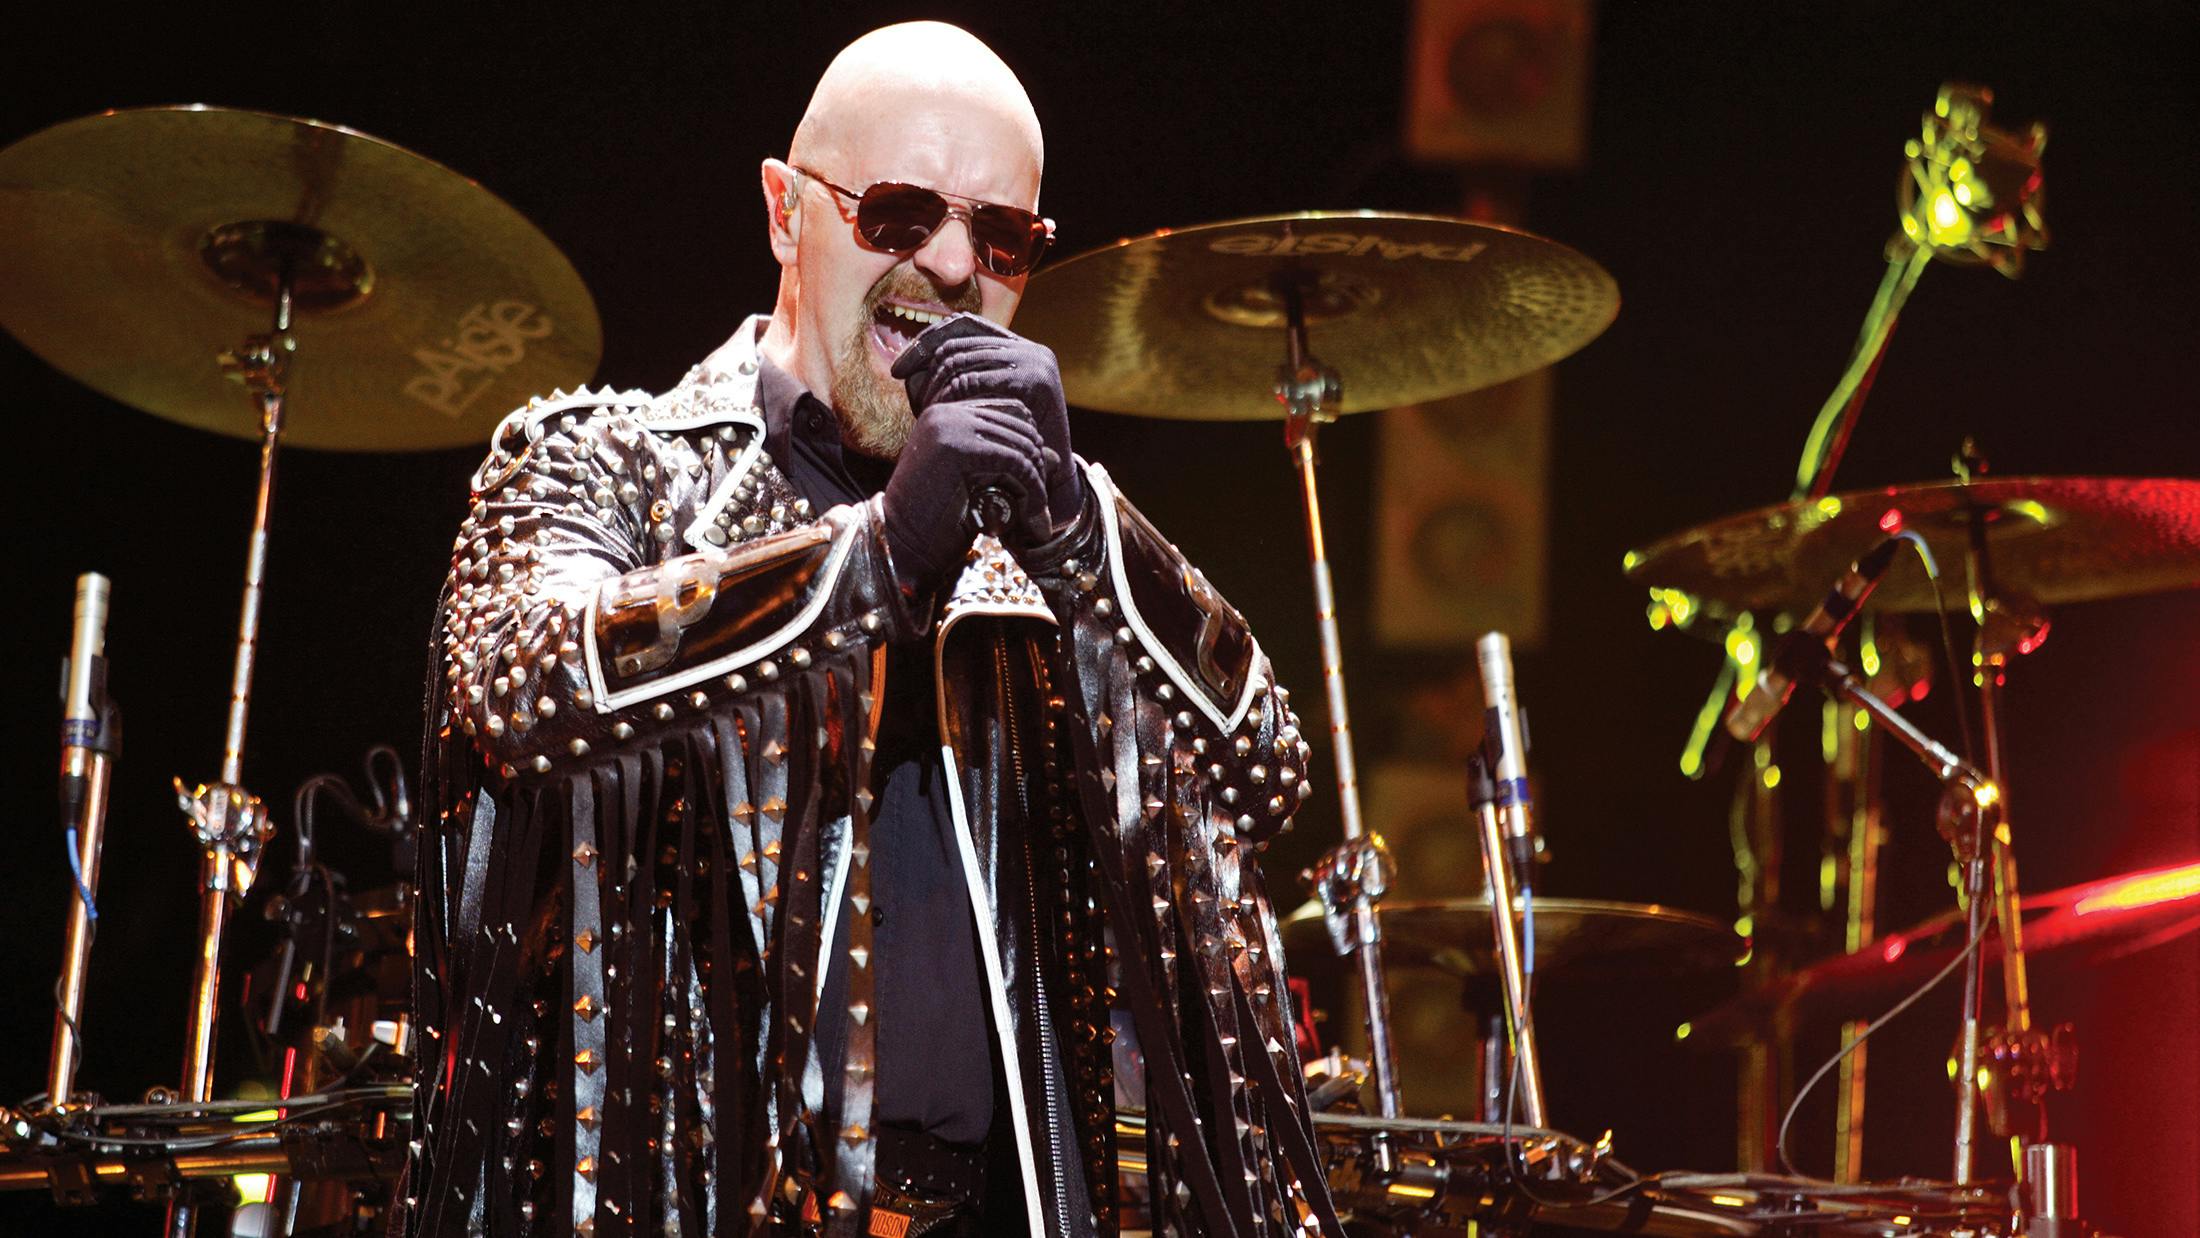 Watch Judas Priest Play Several Classic Songs Live For The First Time